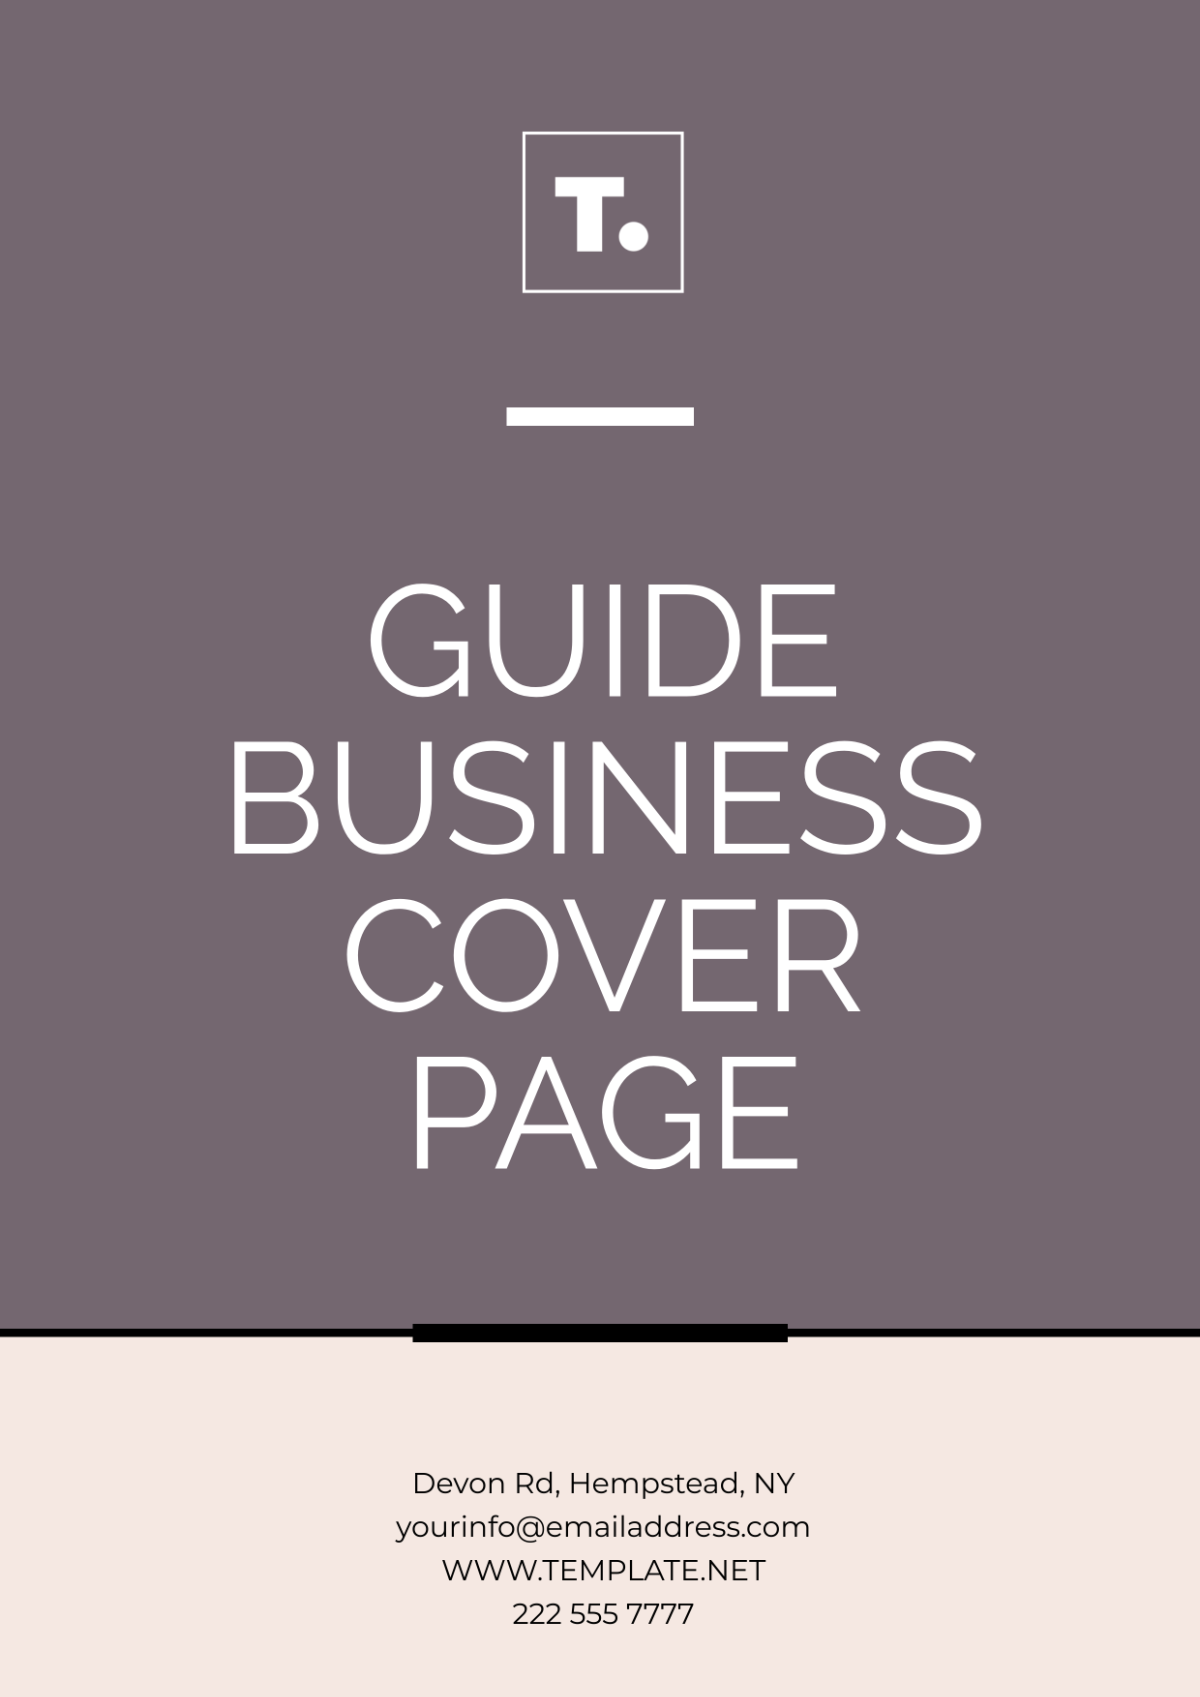 Guide Business Cover Page